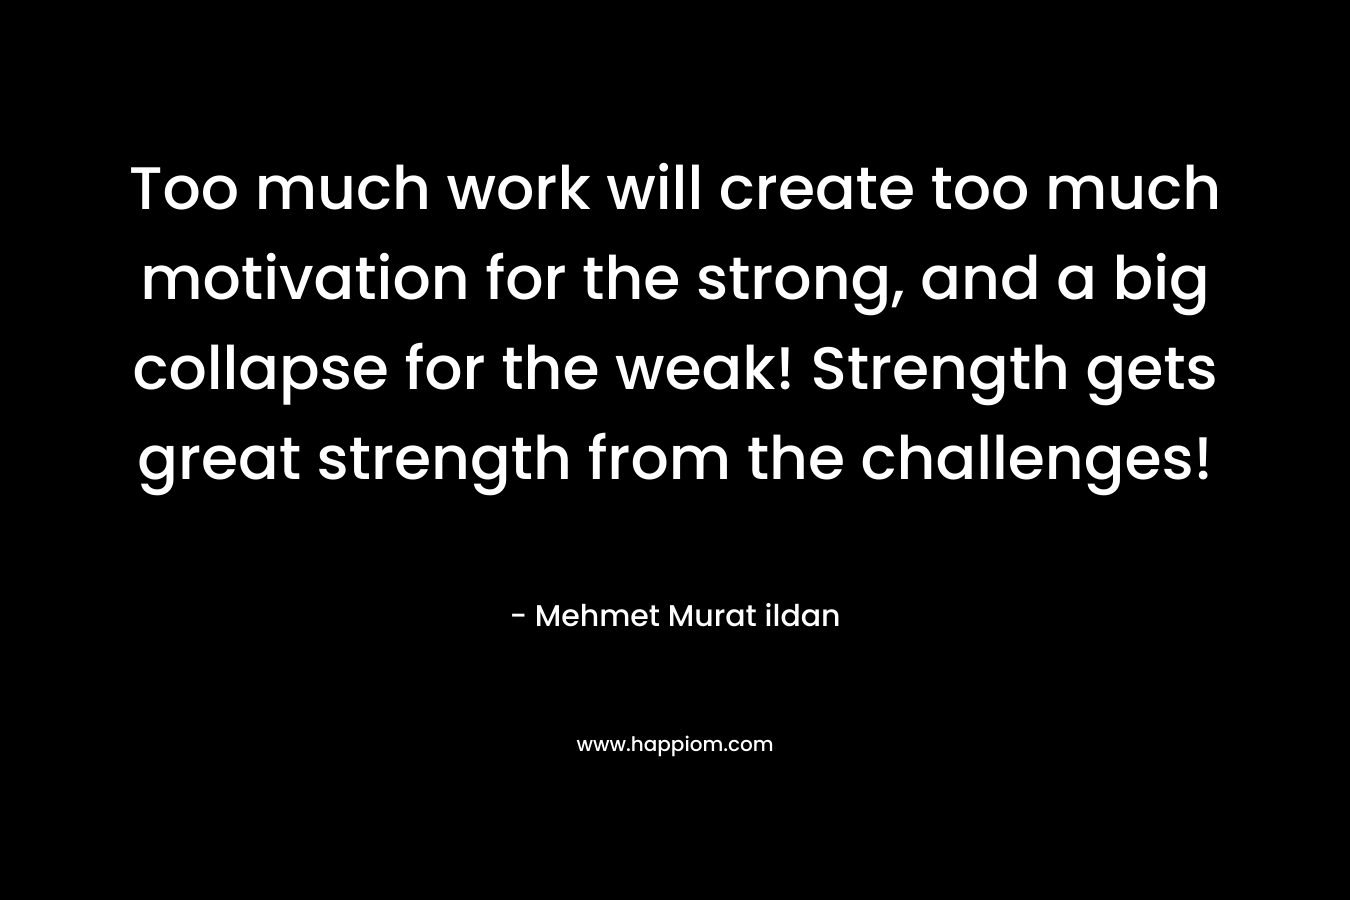 Too much work will create too much motivation for the strong, and a big collapse for the weak! Strength gets great strength from the challenges! – Mehmet Murat ildan